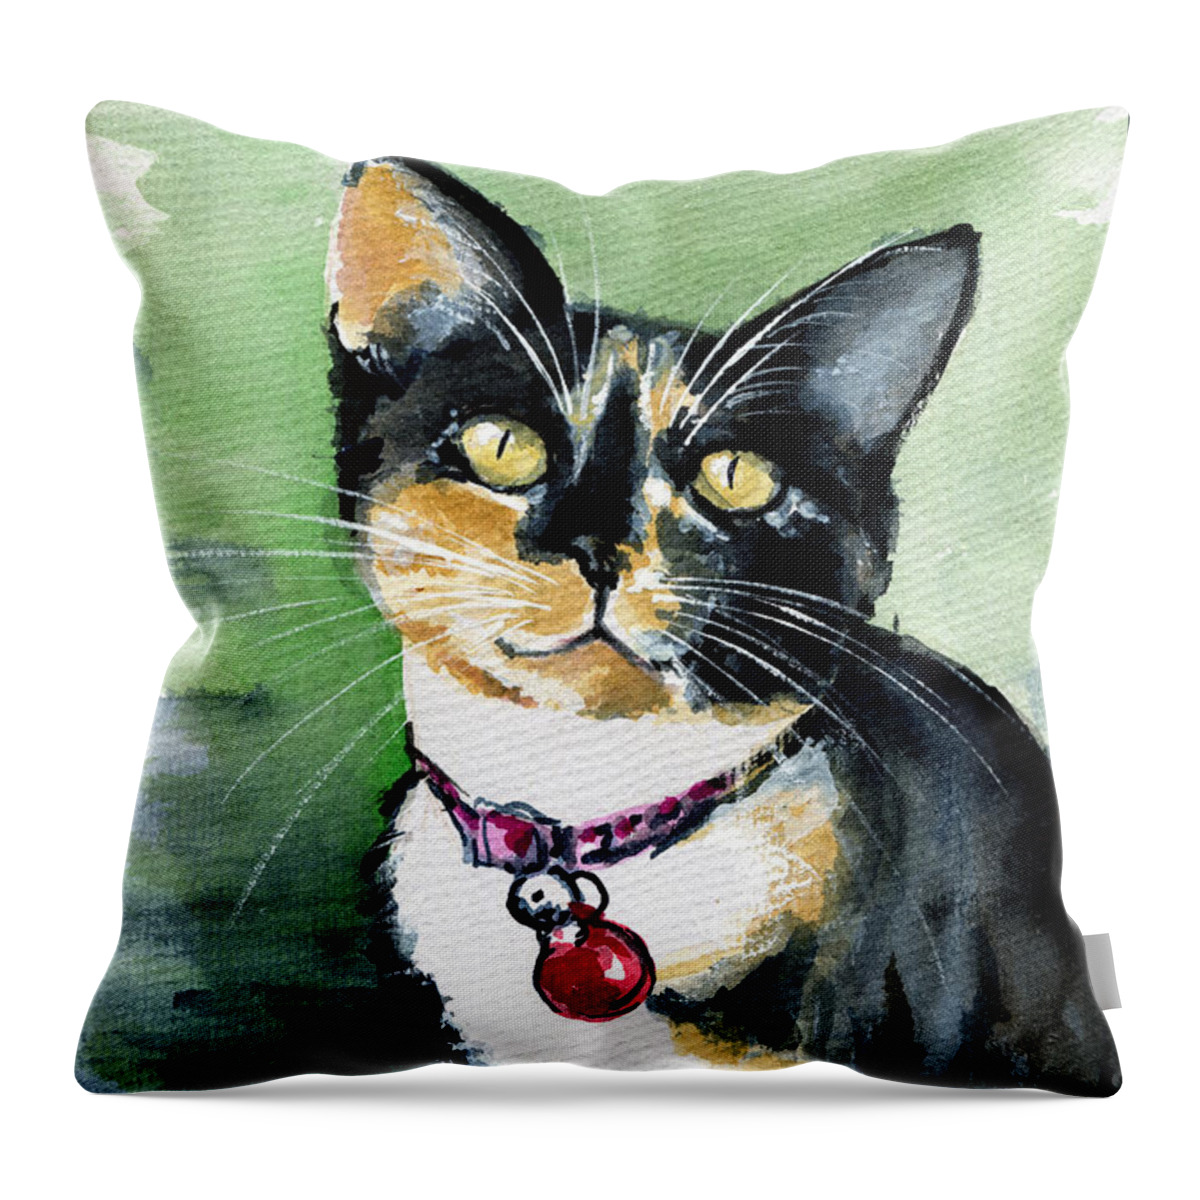 Cat Throw Pillow featuring the painting Galaxy The Calico Kitten by Dora Hathazi Mendes